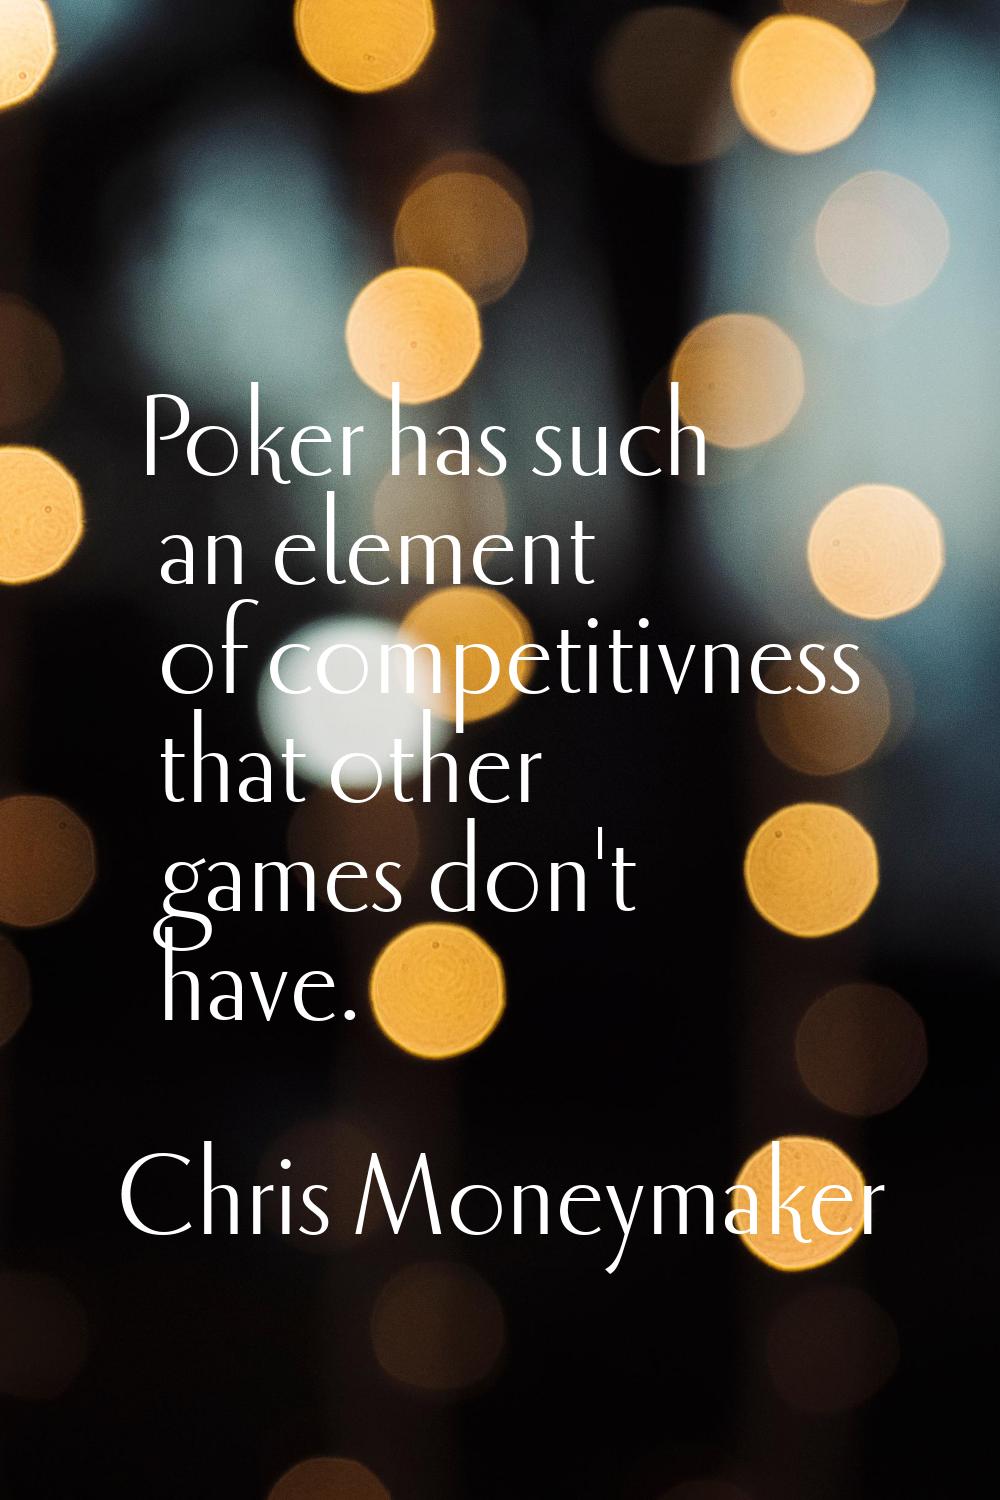 Poker has such an element of competitivness that other games don't have.